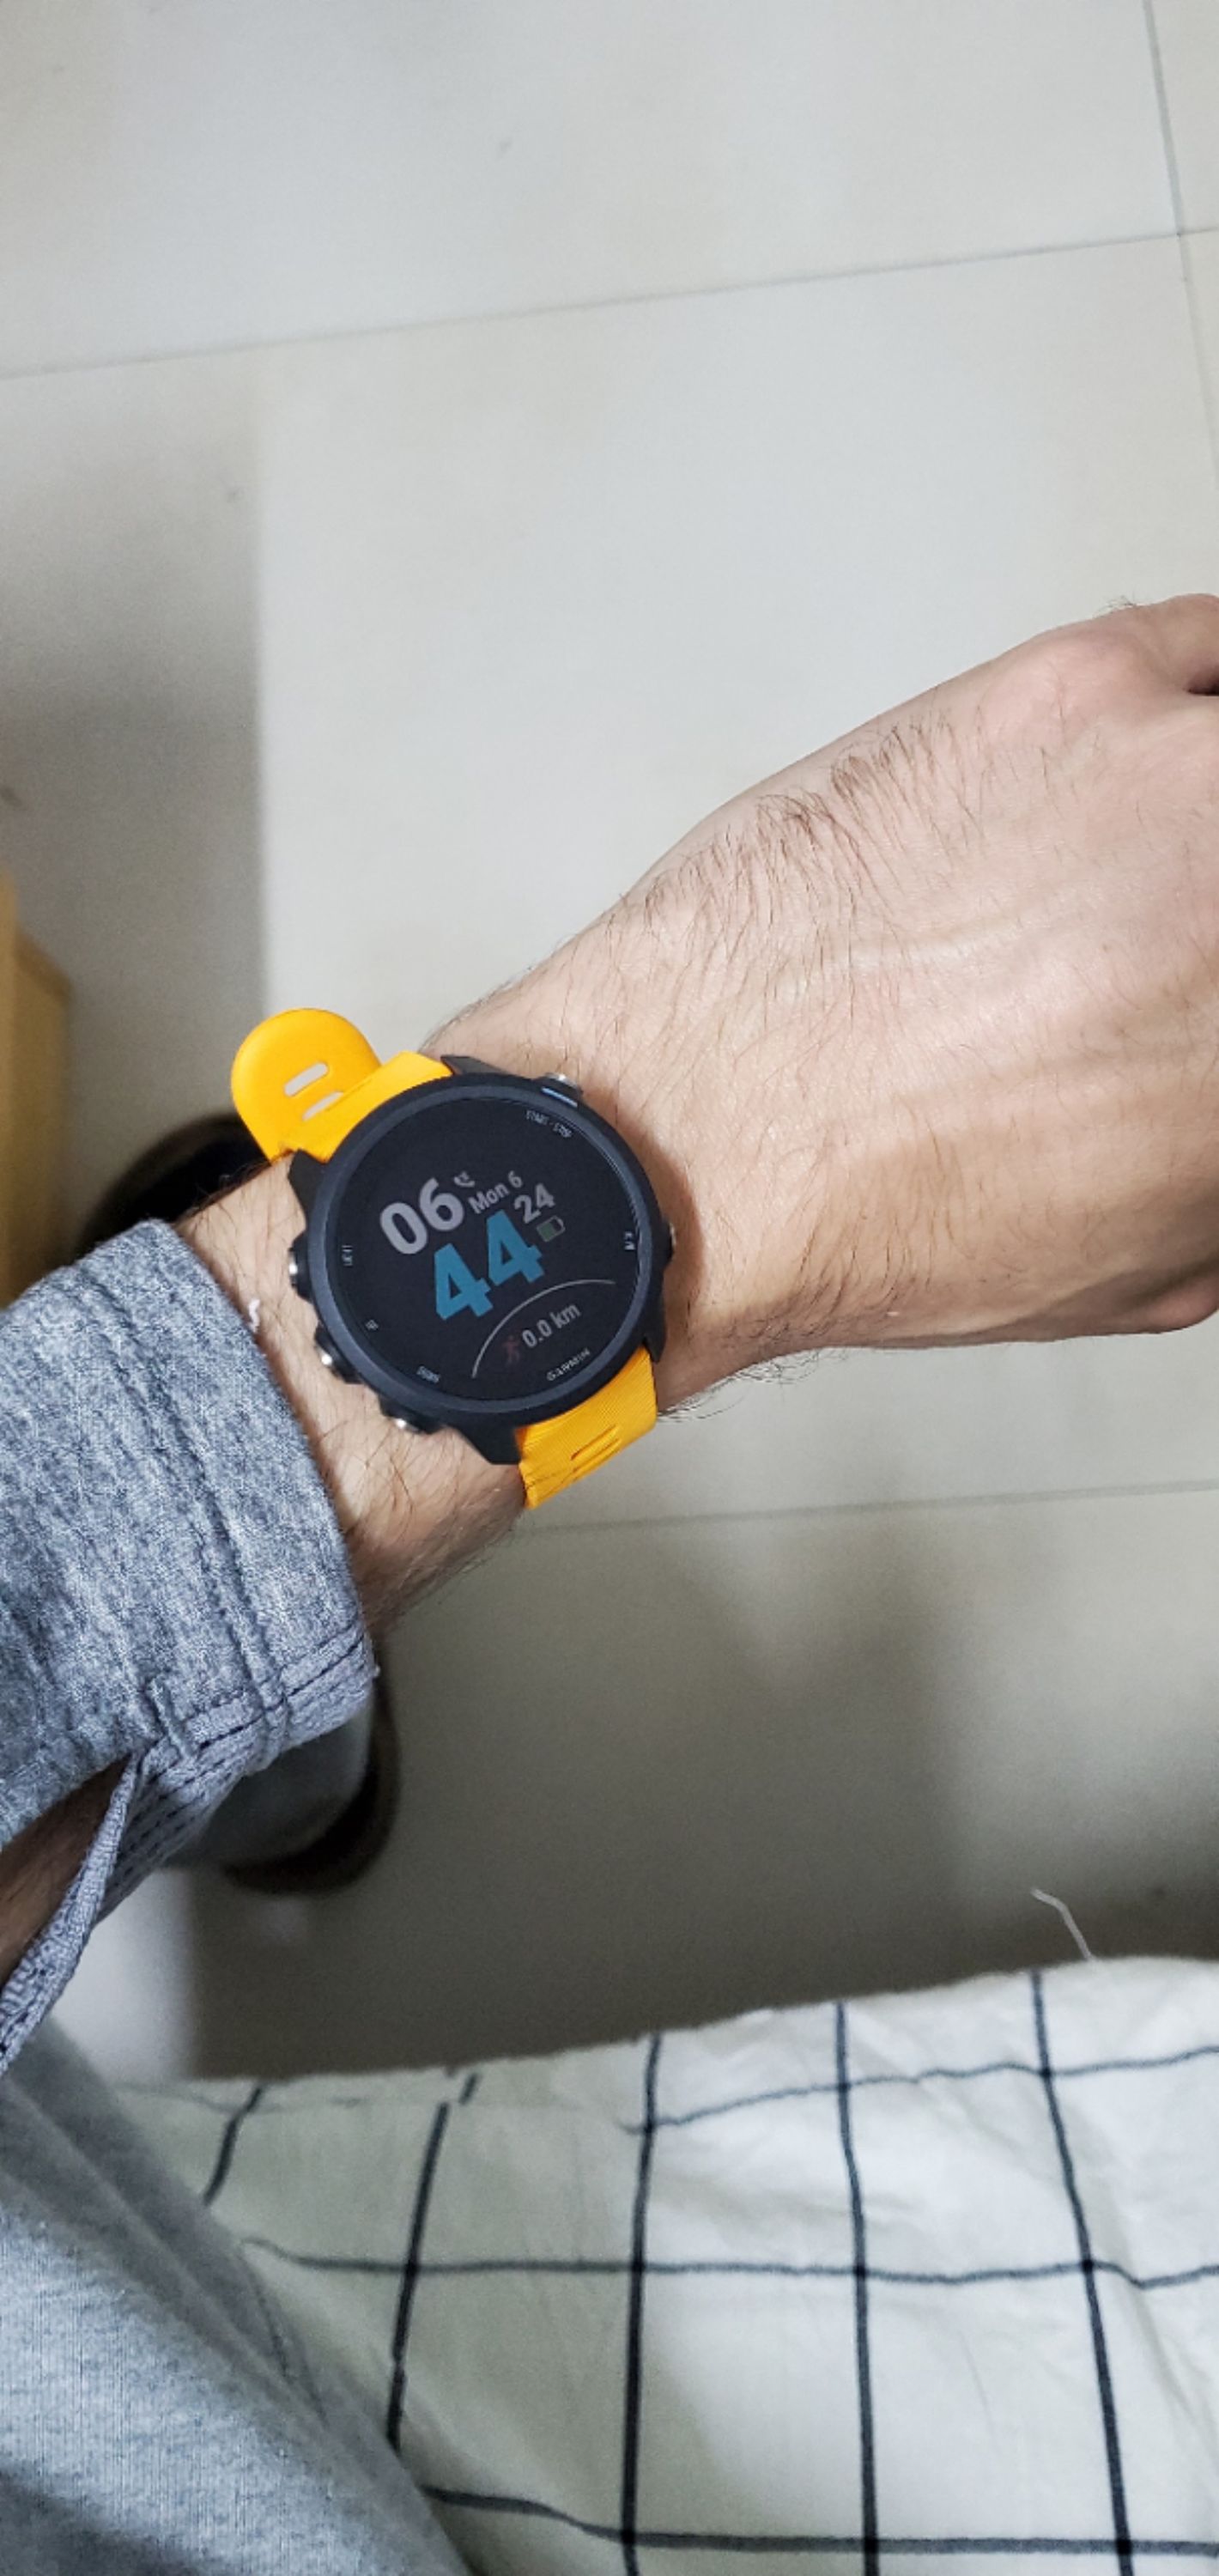 new watch for heartrate based training